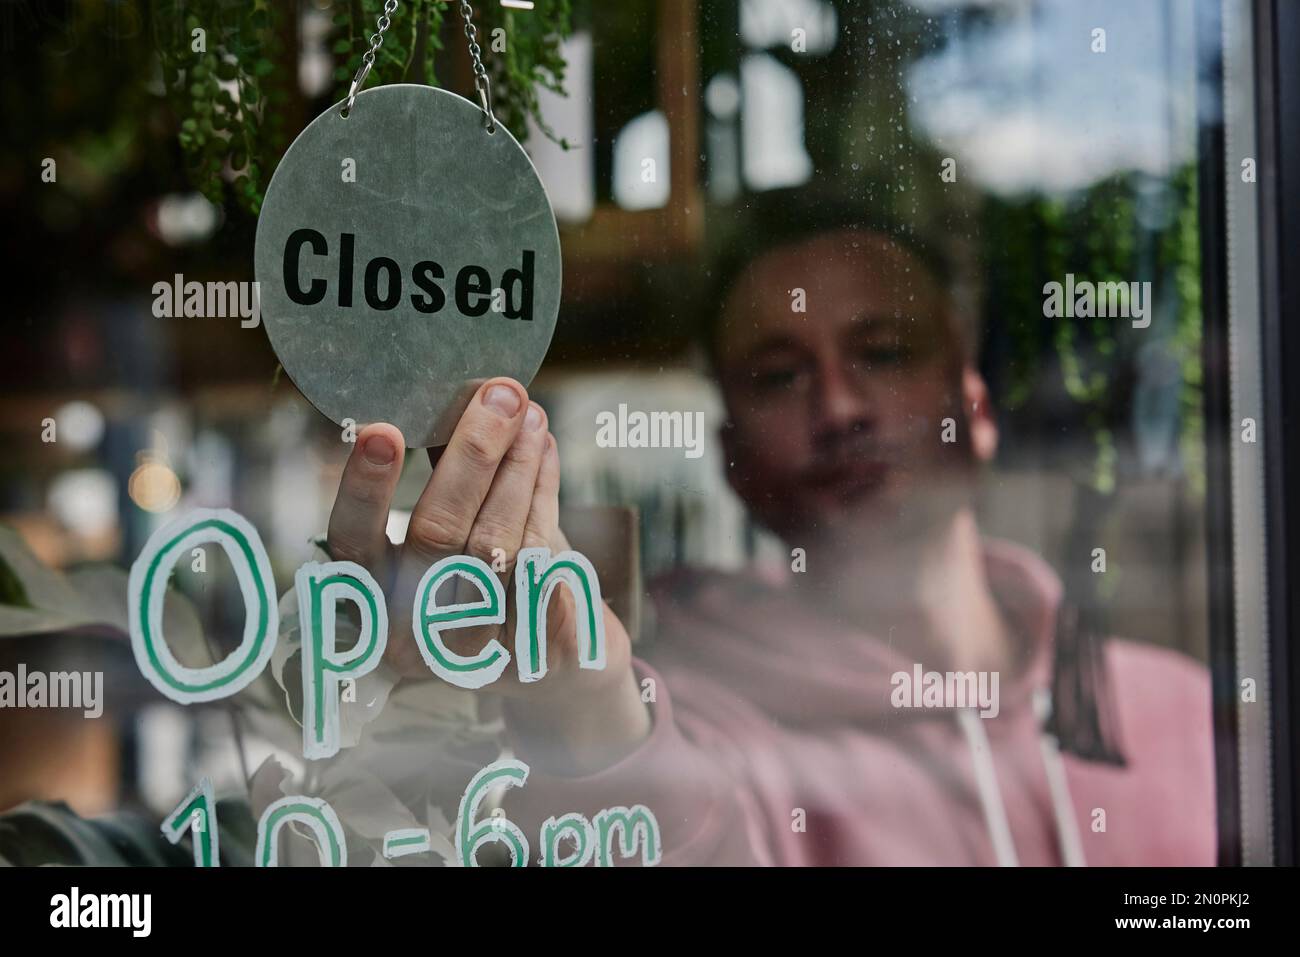 Man placing Closed sign in window of shop Stock Photo